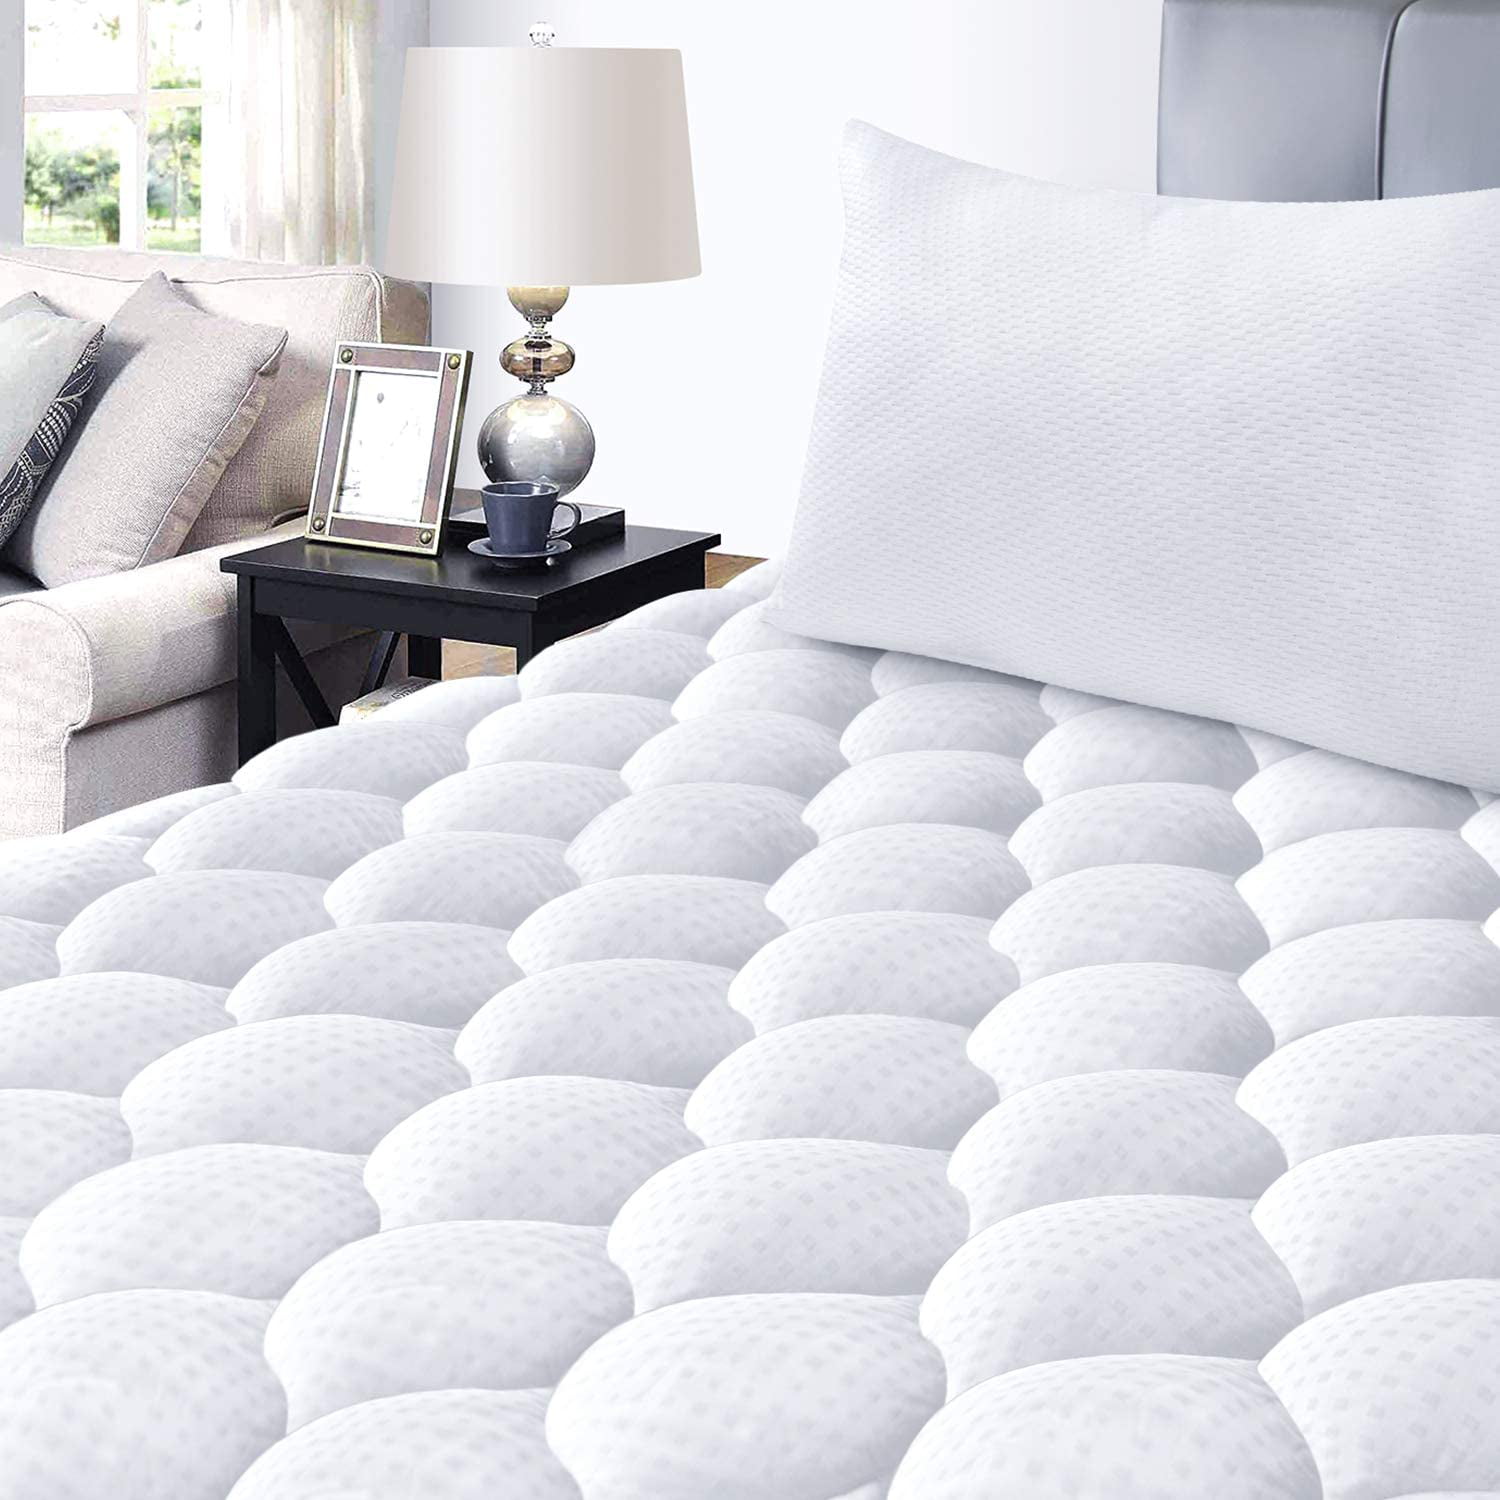 Leafbay Full Mattress Pad, Cotton Quilted Fitted Cooling Mattress